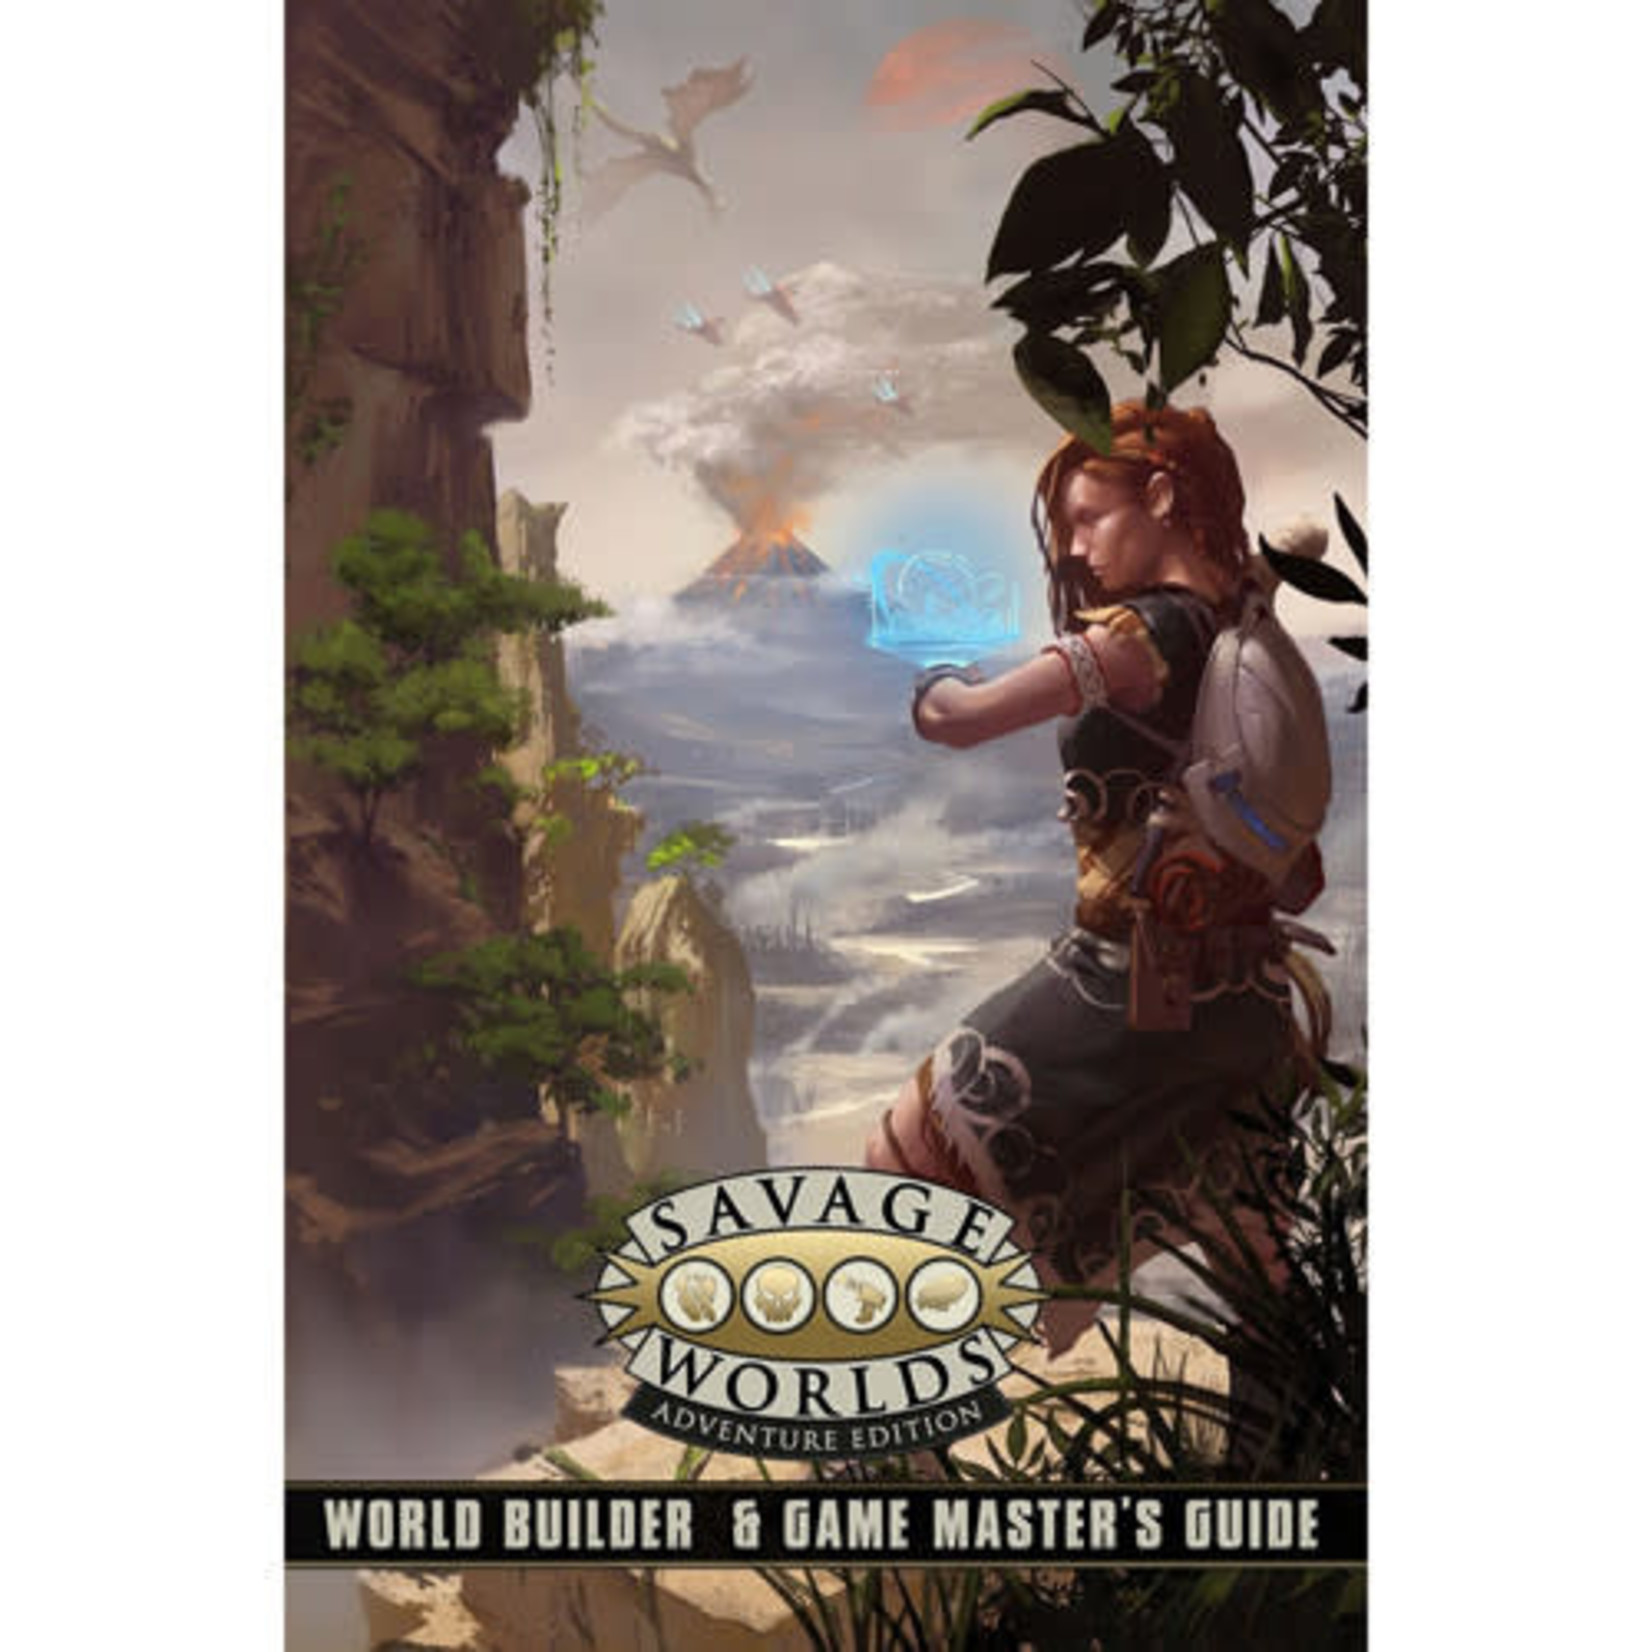 Savage Worlds World Builder and Game Master's Guide